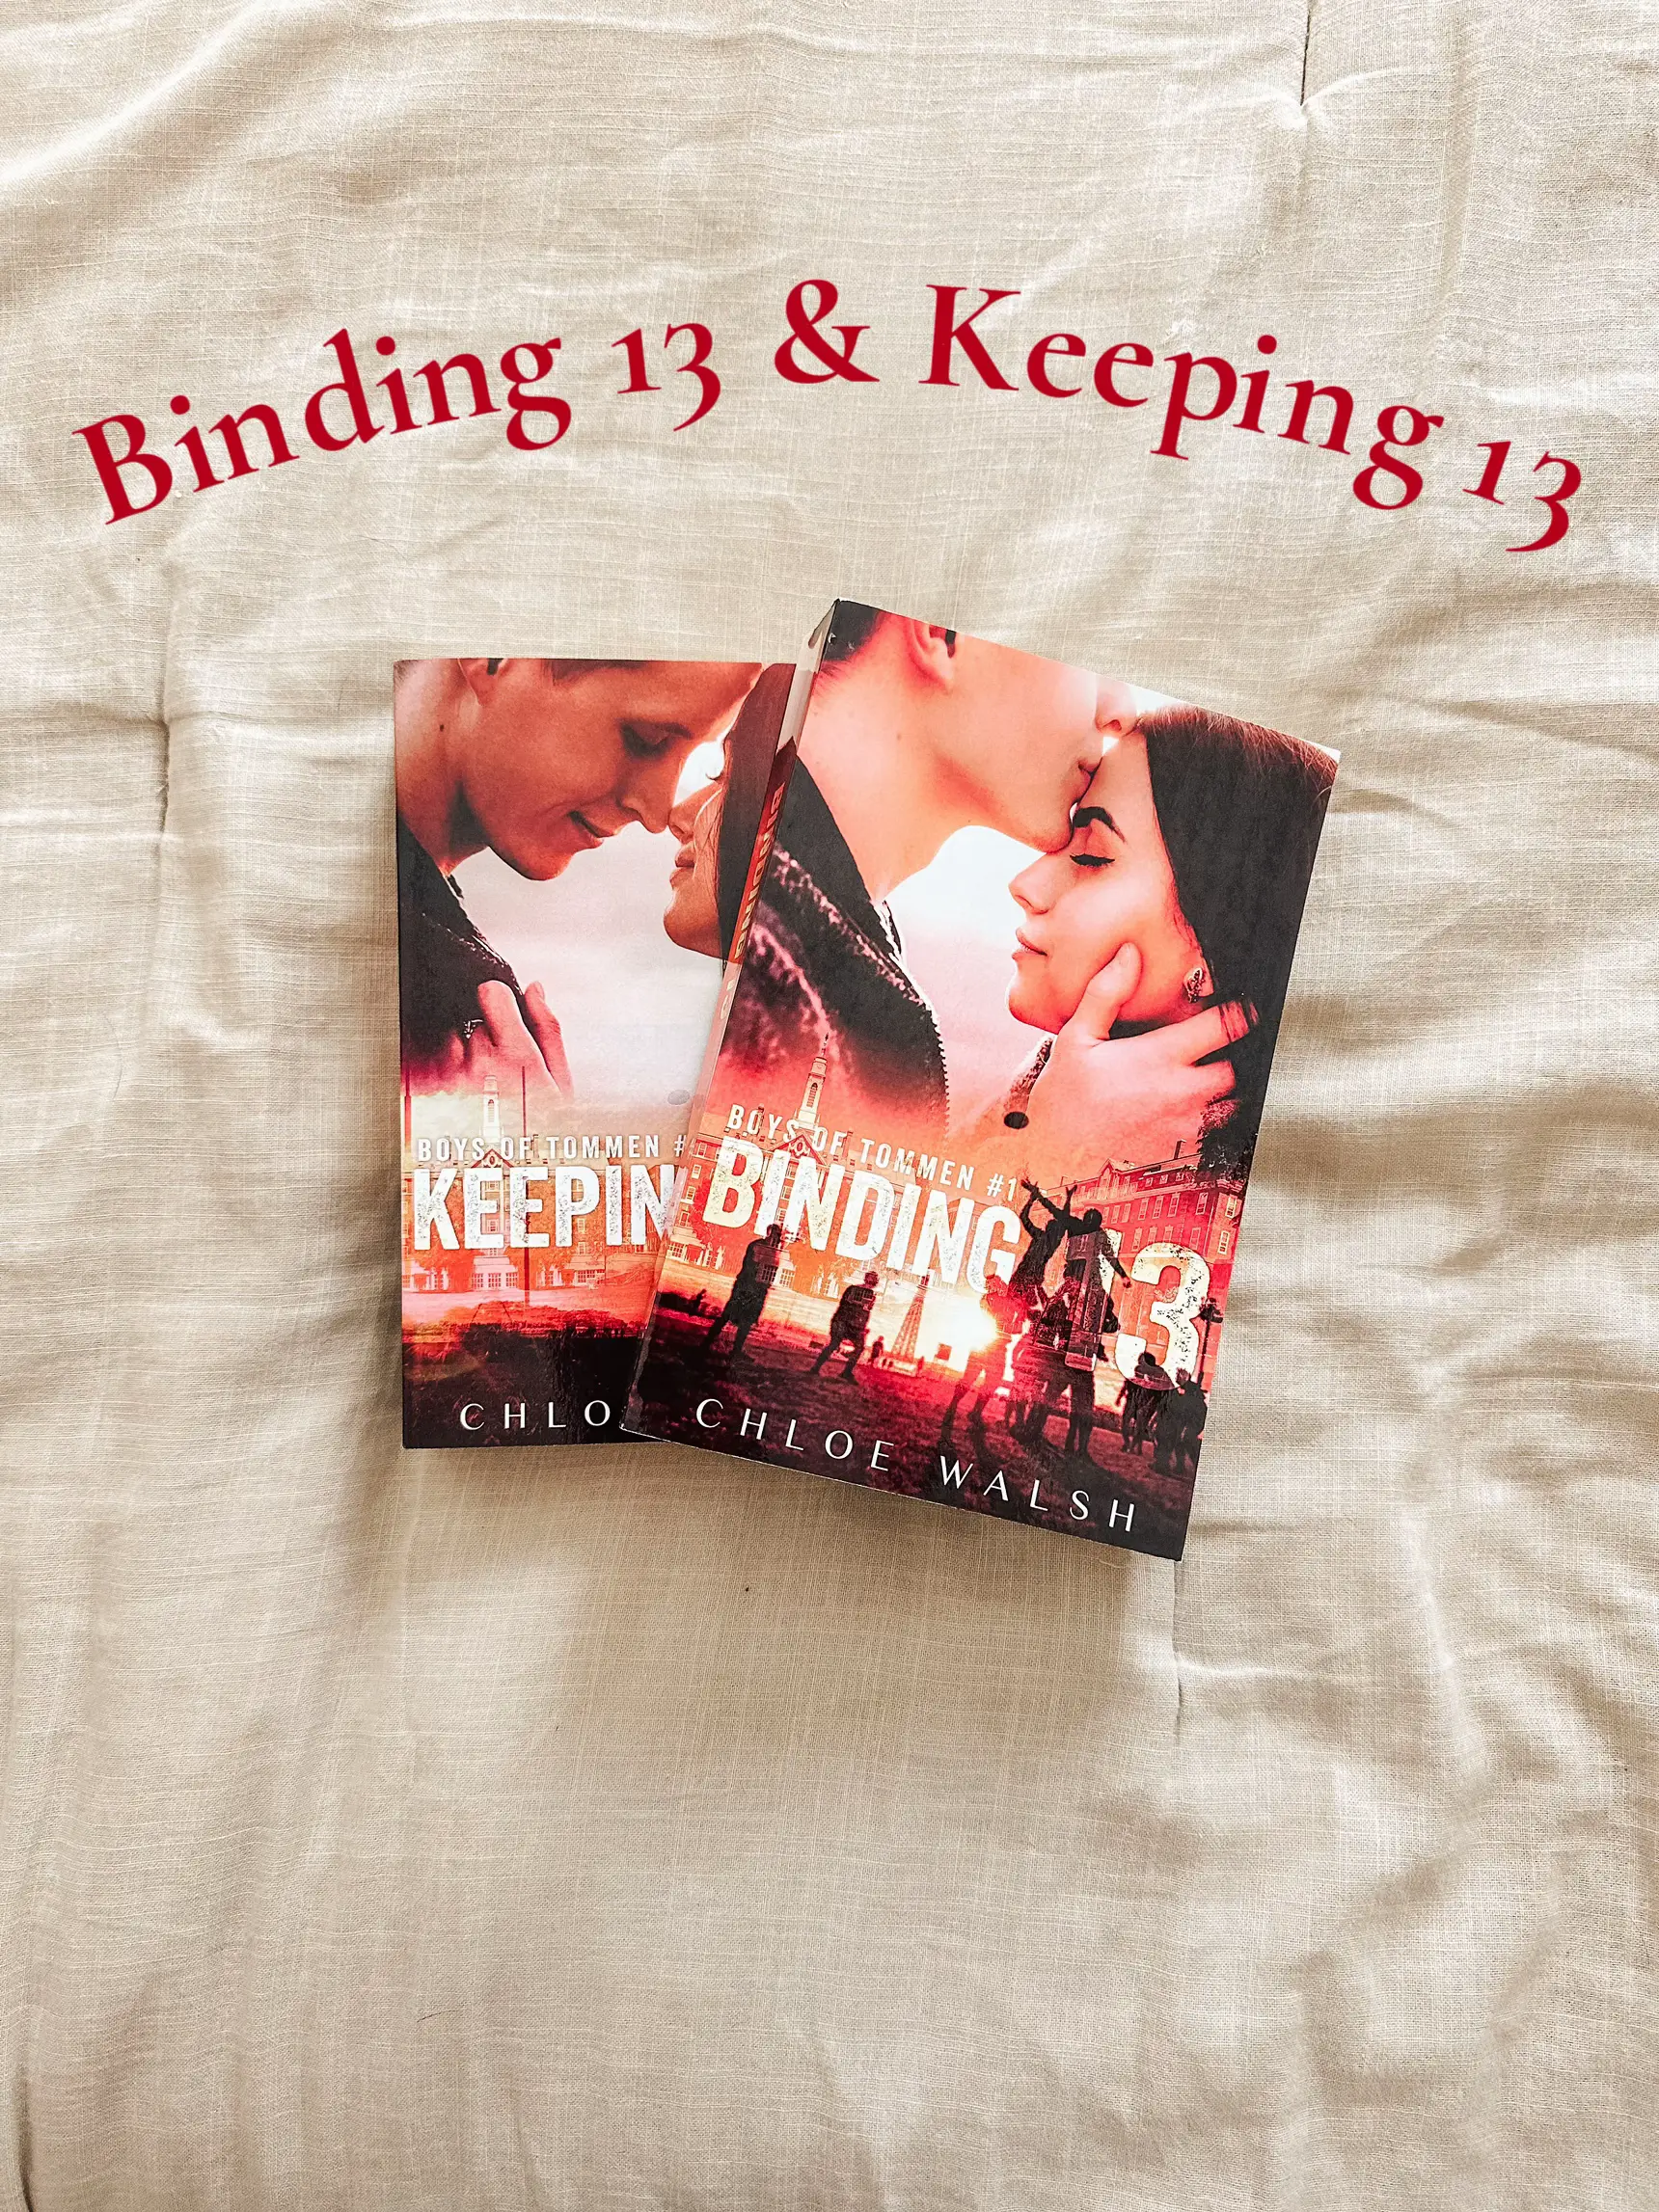 binding 13, johnnyshannon, chloe walsh  Best quotes from books, Book  writing inspiration, Book writing tips